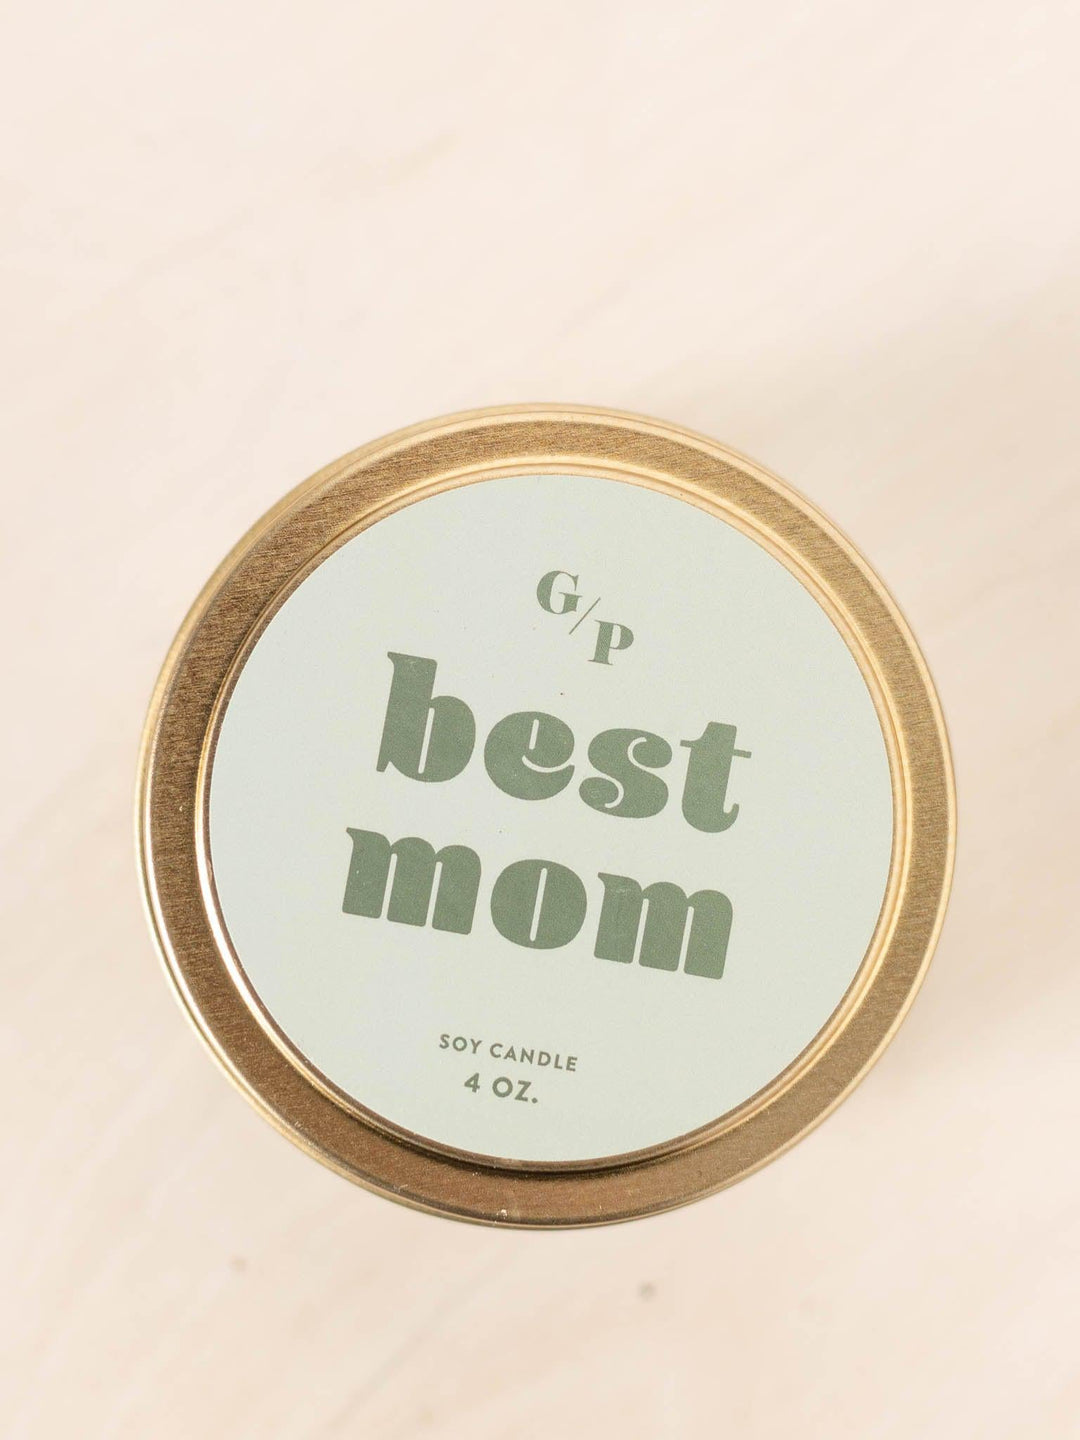 GP Co-Best Mom 4oz Candle - Leela and Lavender